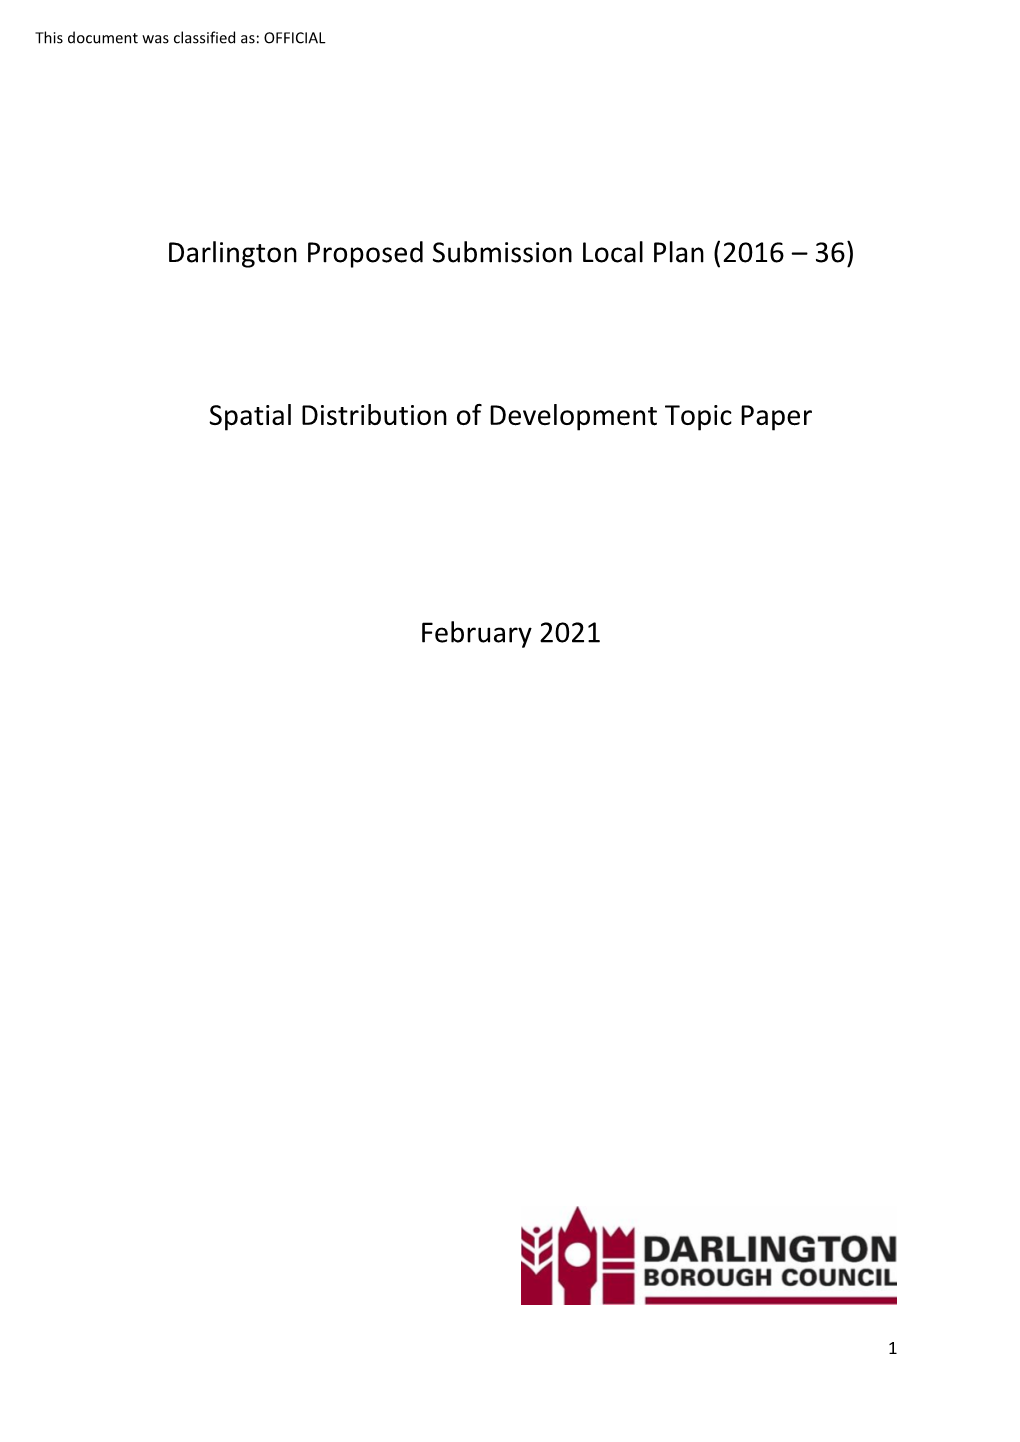 Spatial Distribution of Development Topic Paper